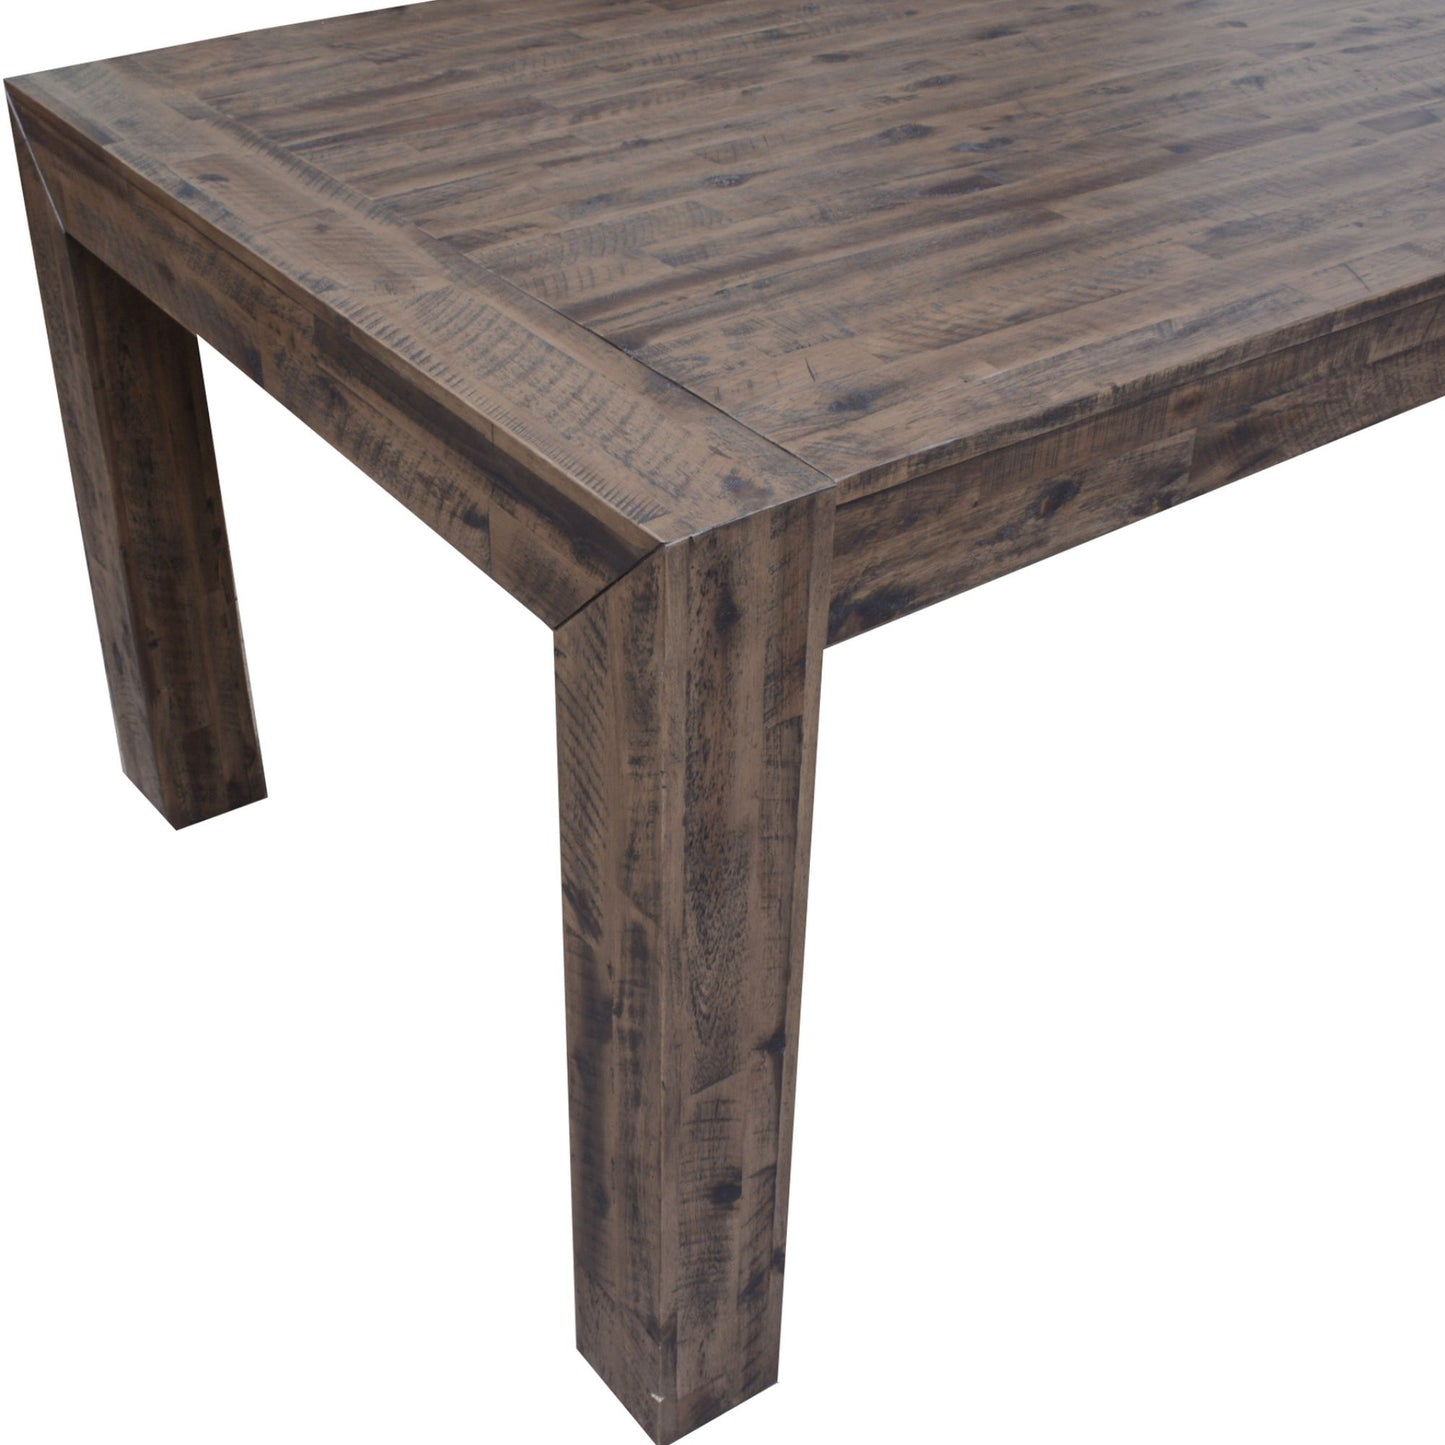 Solid Acacia Timber Wood Dining Table 210cm  - Stone Grey